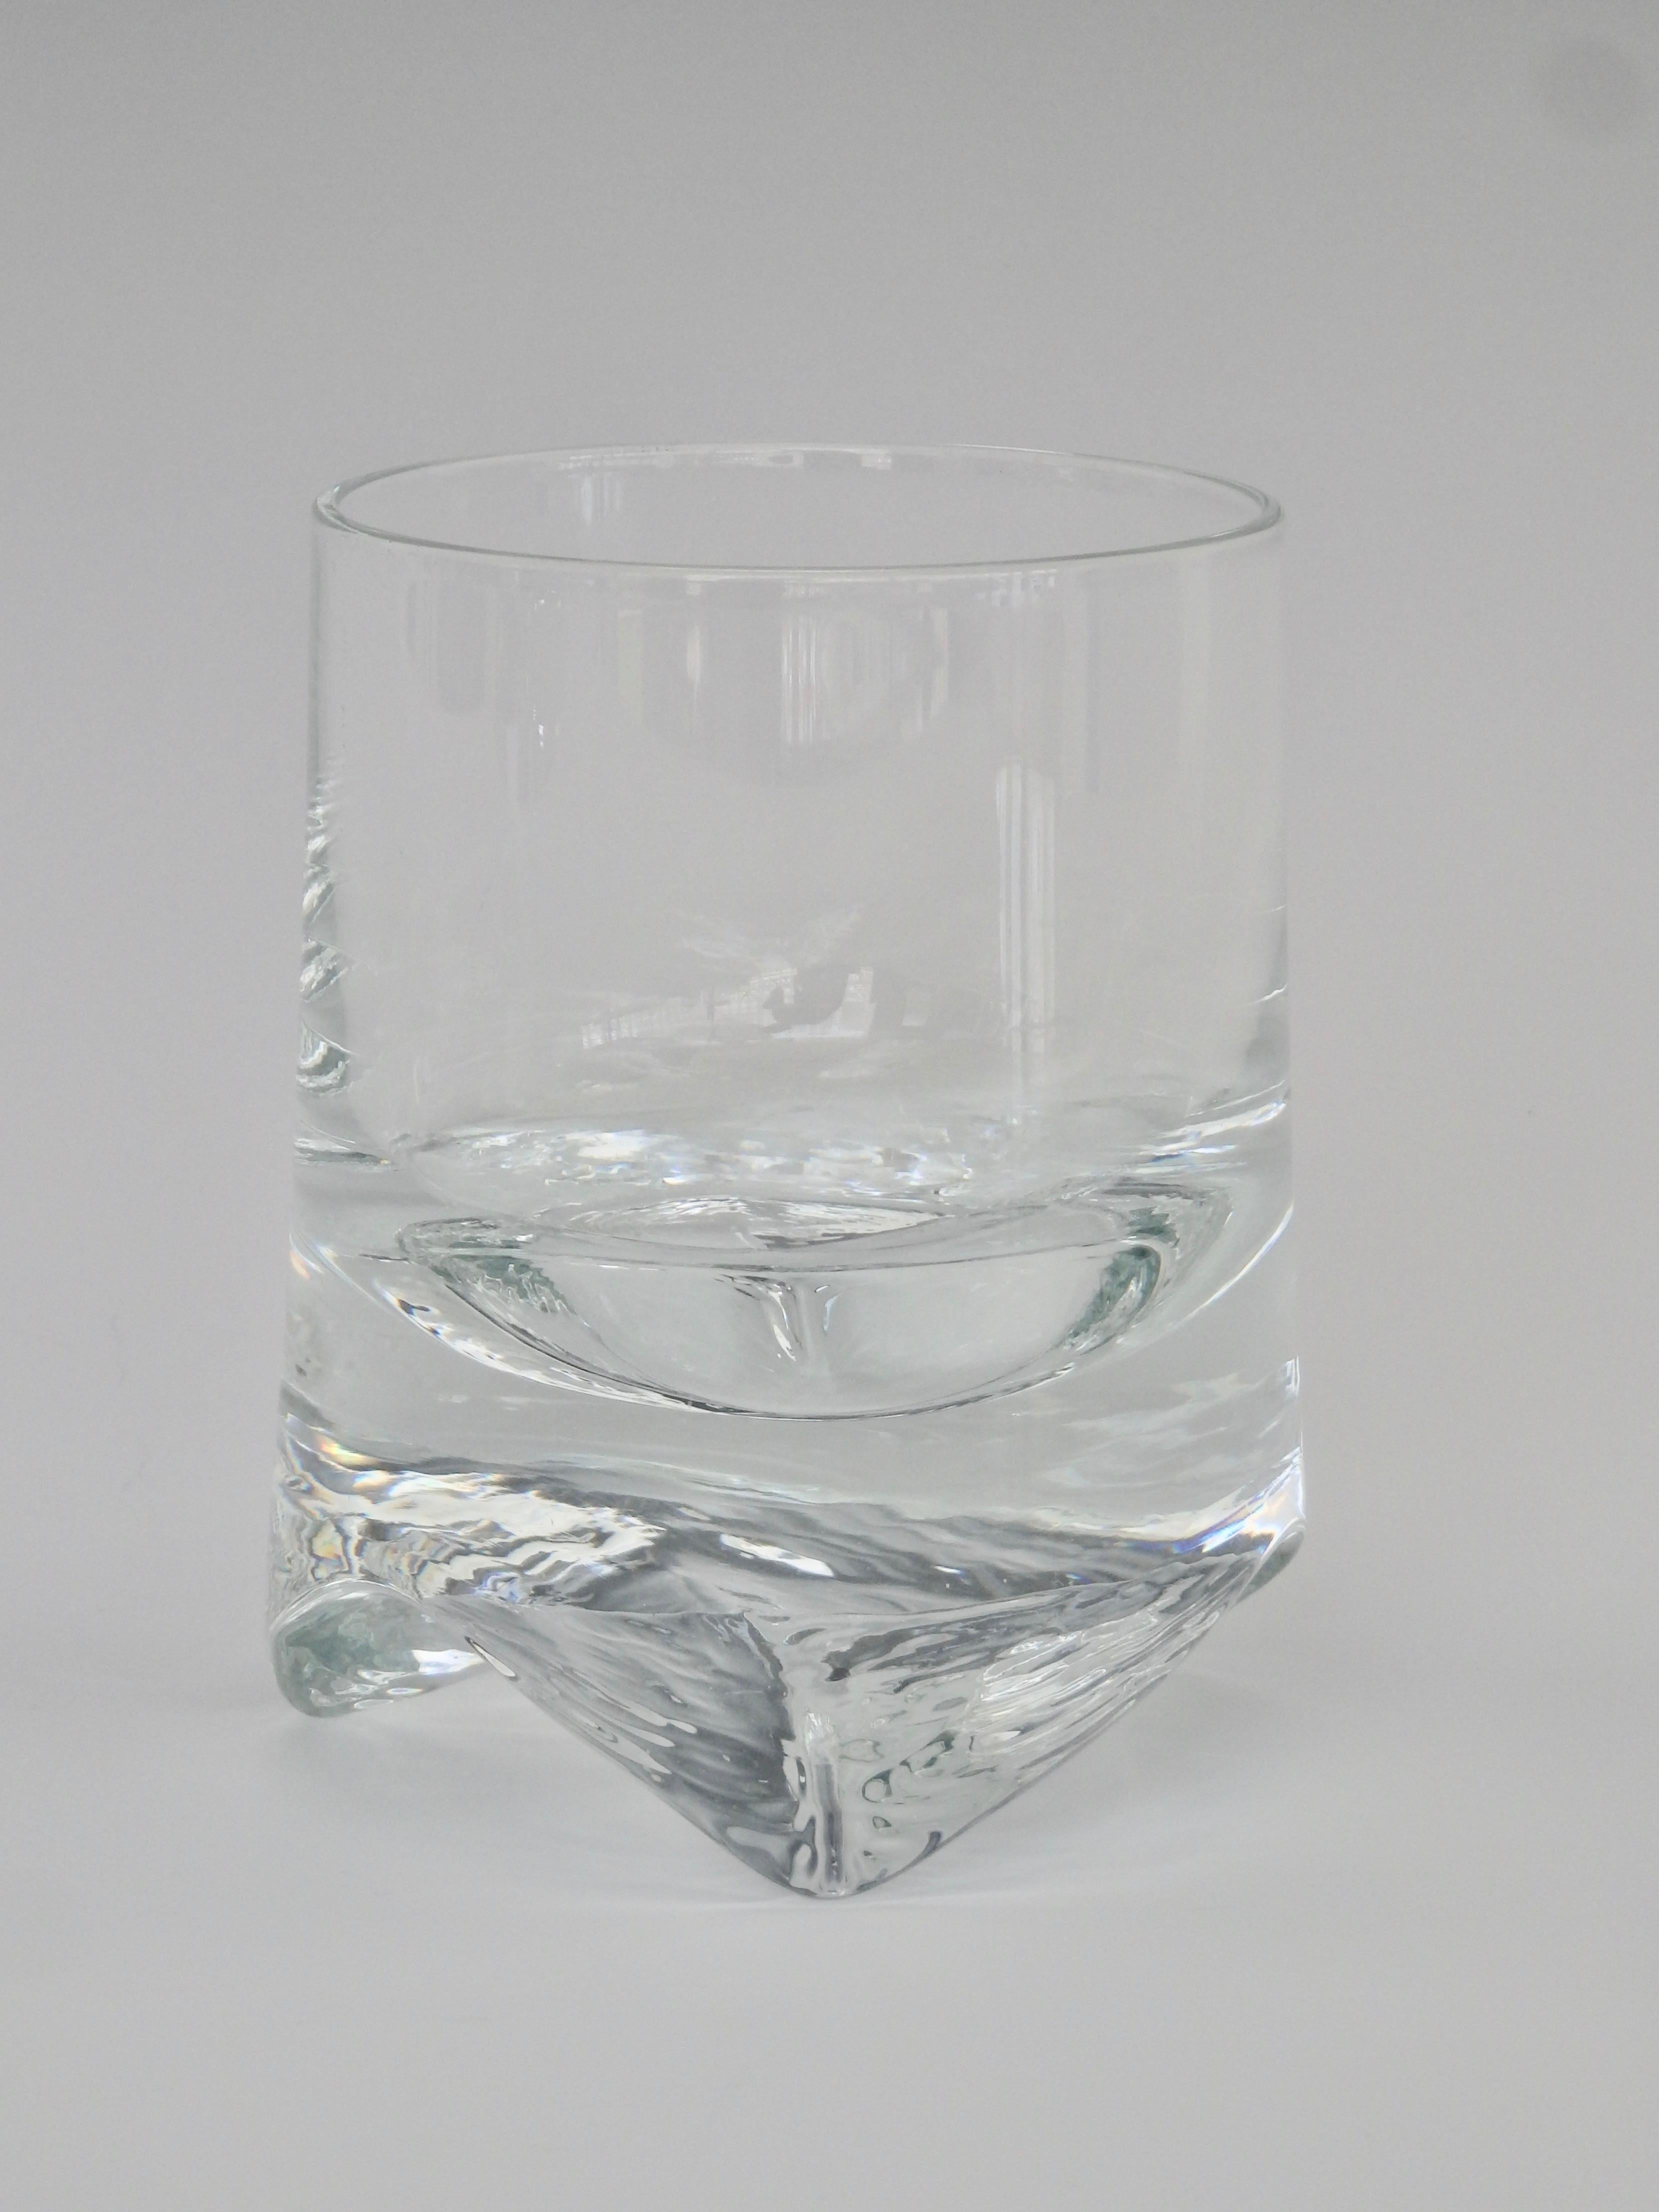 Six Clear Whiskey Bourbon Scotch or Rocks Glasses In Good Condition For Sale In Ferndale, MI